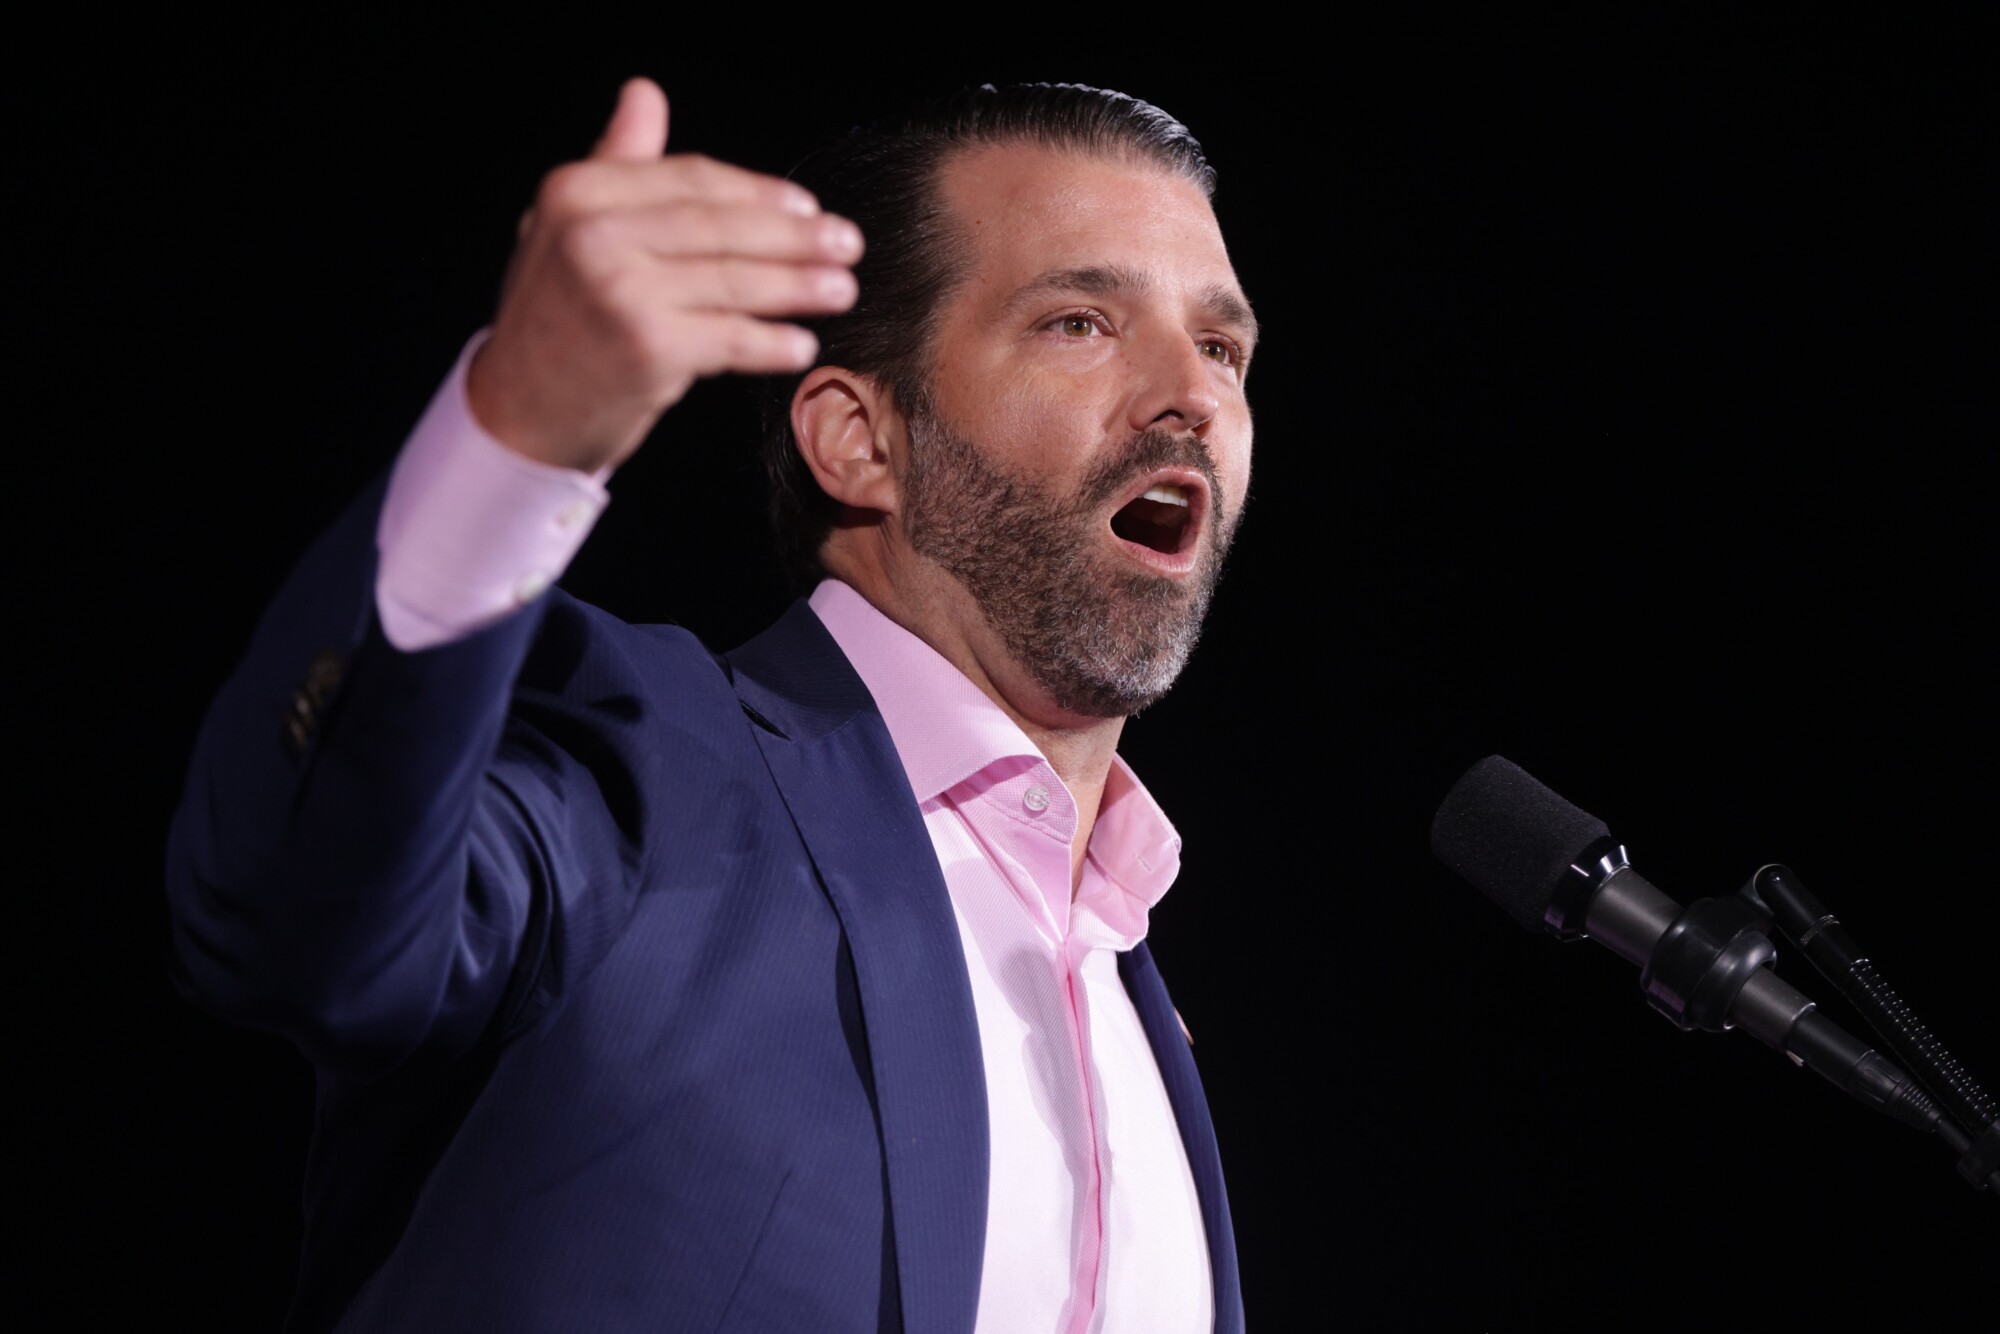 Facts Matter (Feb. 8): Trump Jr: Here’s What Comes Next for Our Amazing Movement